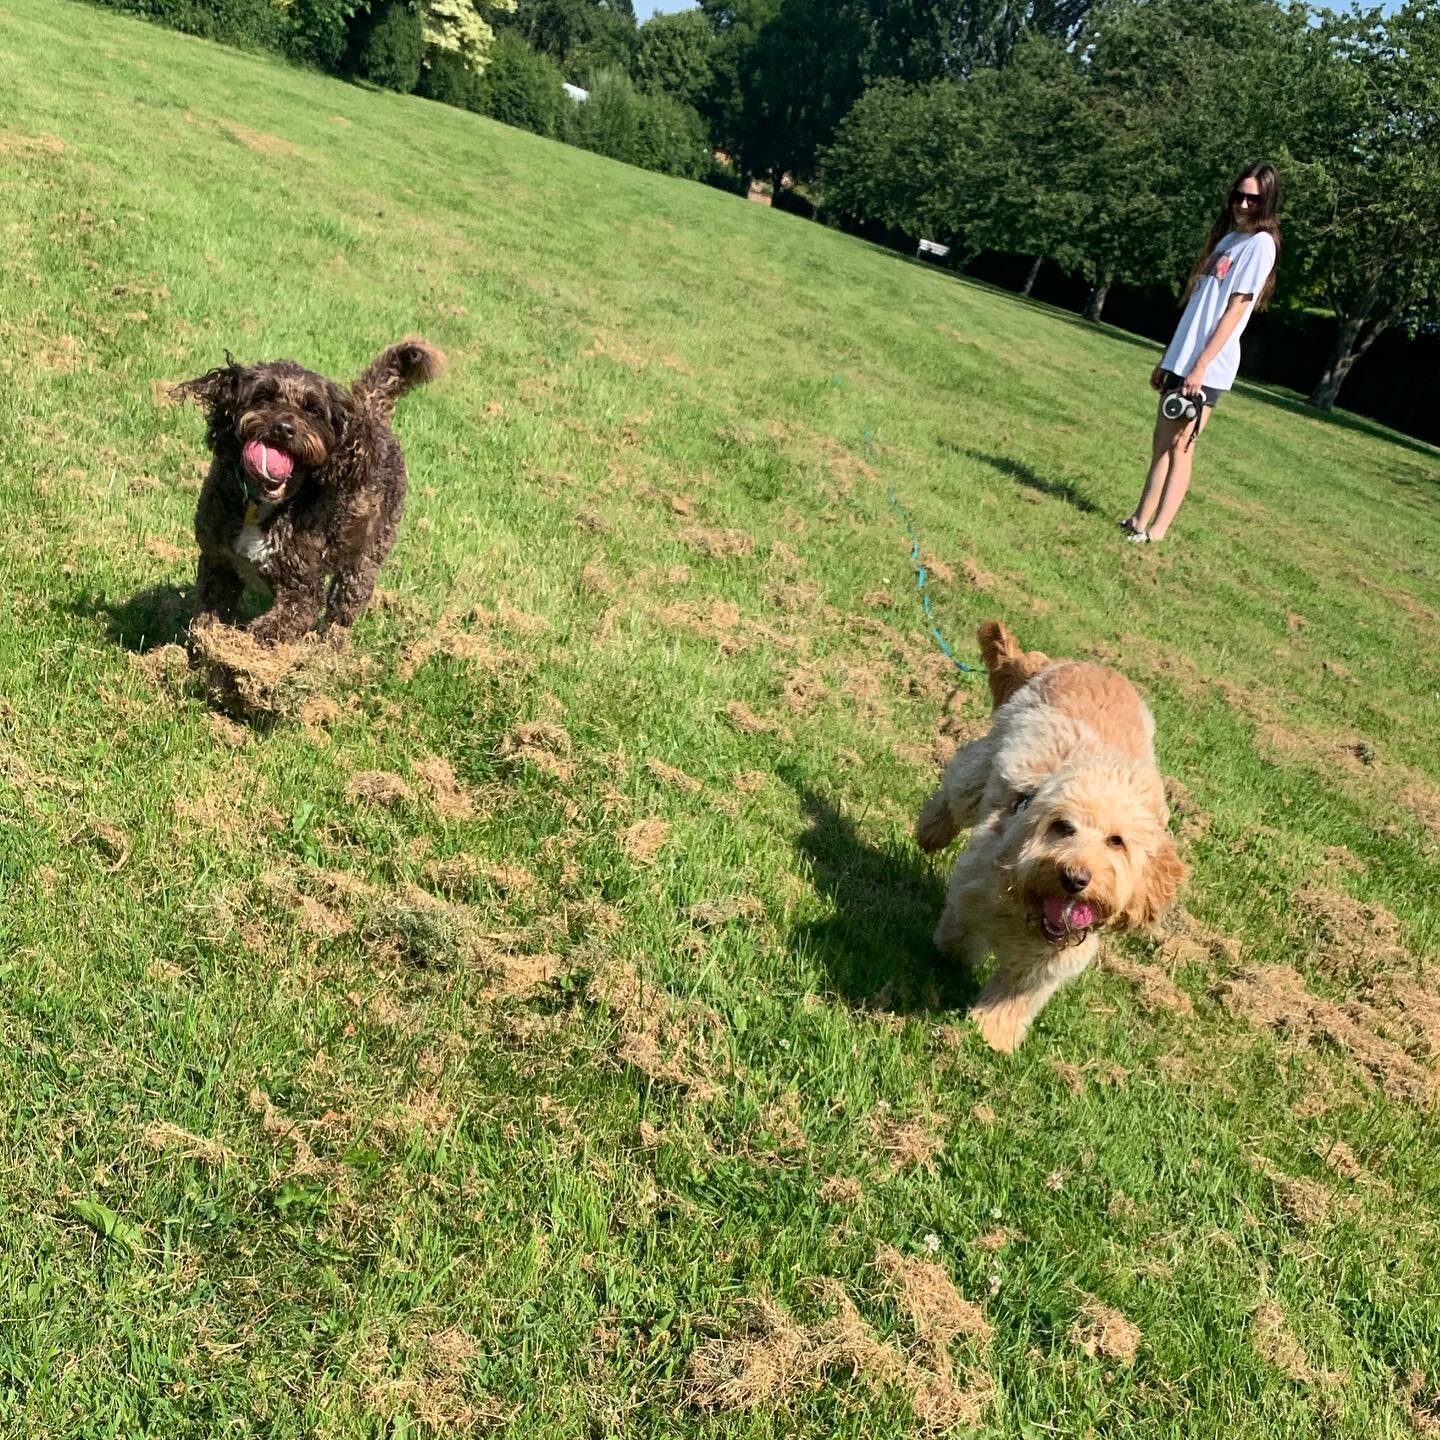 Odi and Lexi doing what cockapoos do. Run and have fun Want to meet Oli and his Pawtner Lexi? Give us a like and get in touch 🐕 x  #york  #yorkshire #yorkcity  #photography  #newbusiness #smallbusiness #supportsmallbusiness  #dogphotography  #dogpho